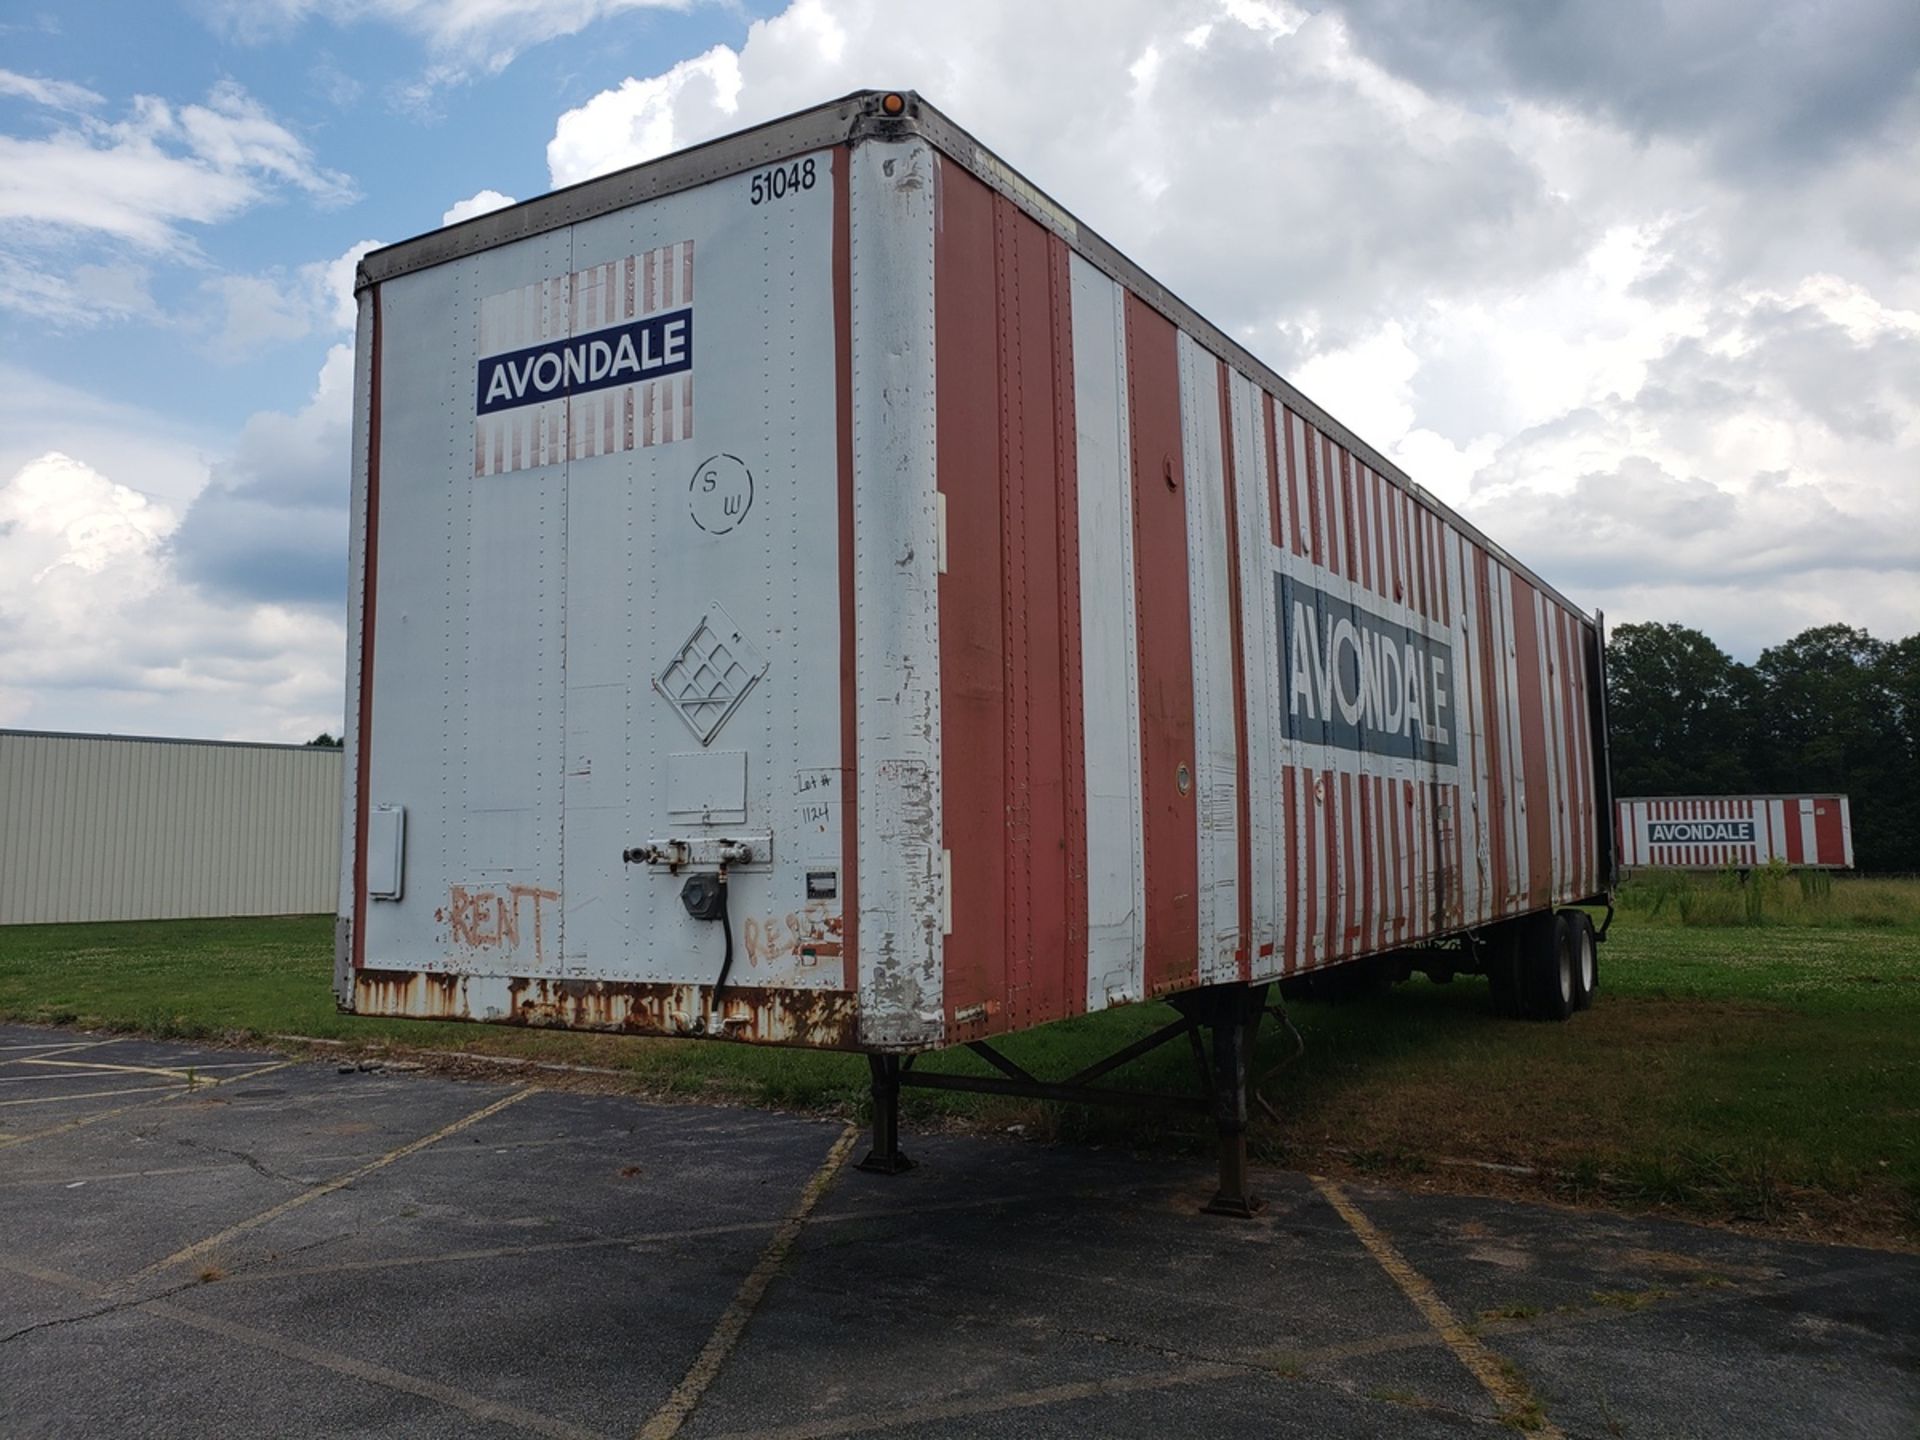 Dry Van Storage Trailer, Trailer # 51048. (No Title) Rig Fee: $Buyer To Remove